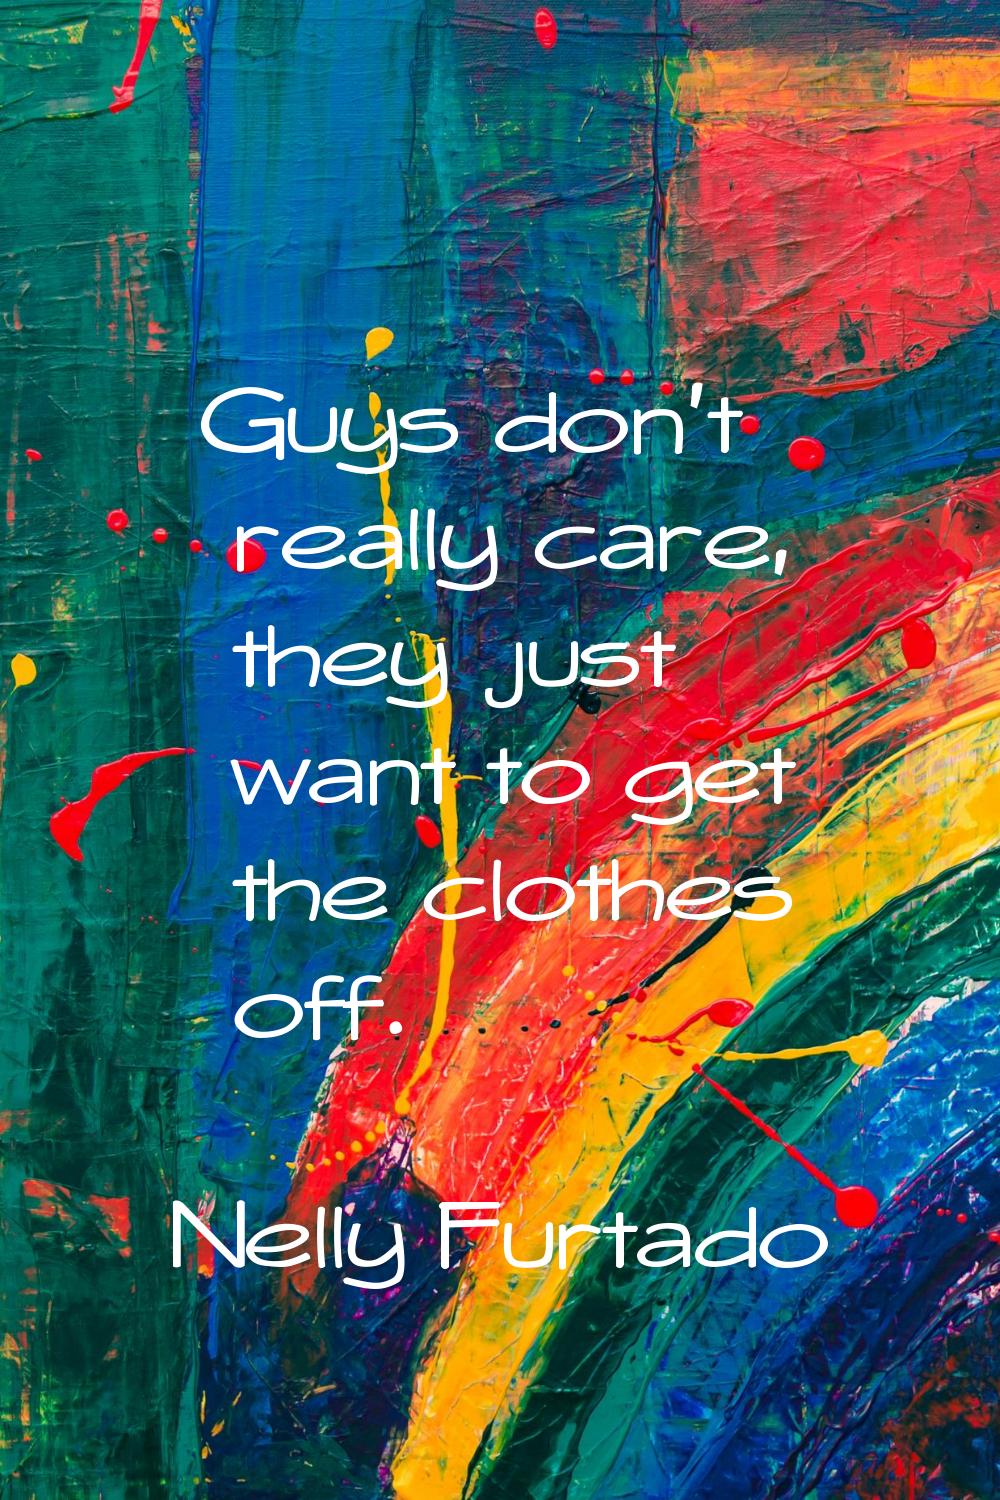 Guys don't really care, they just want to get the clothes off.